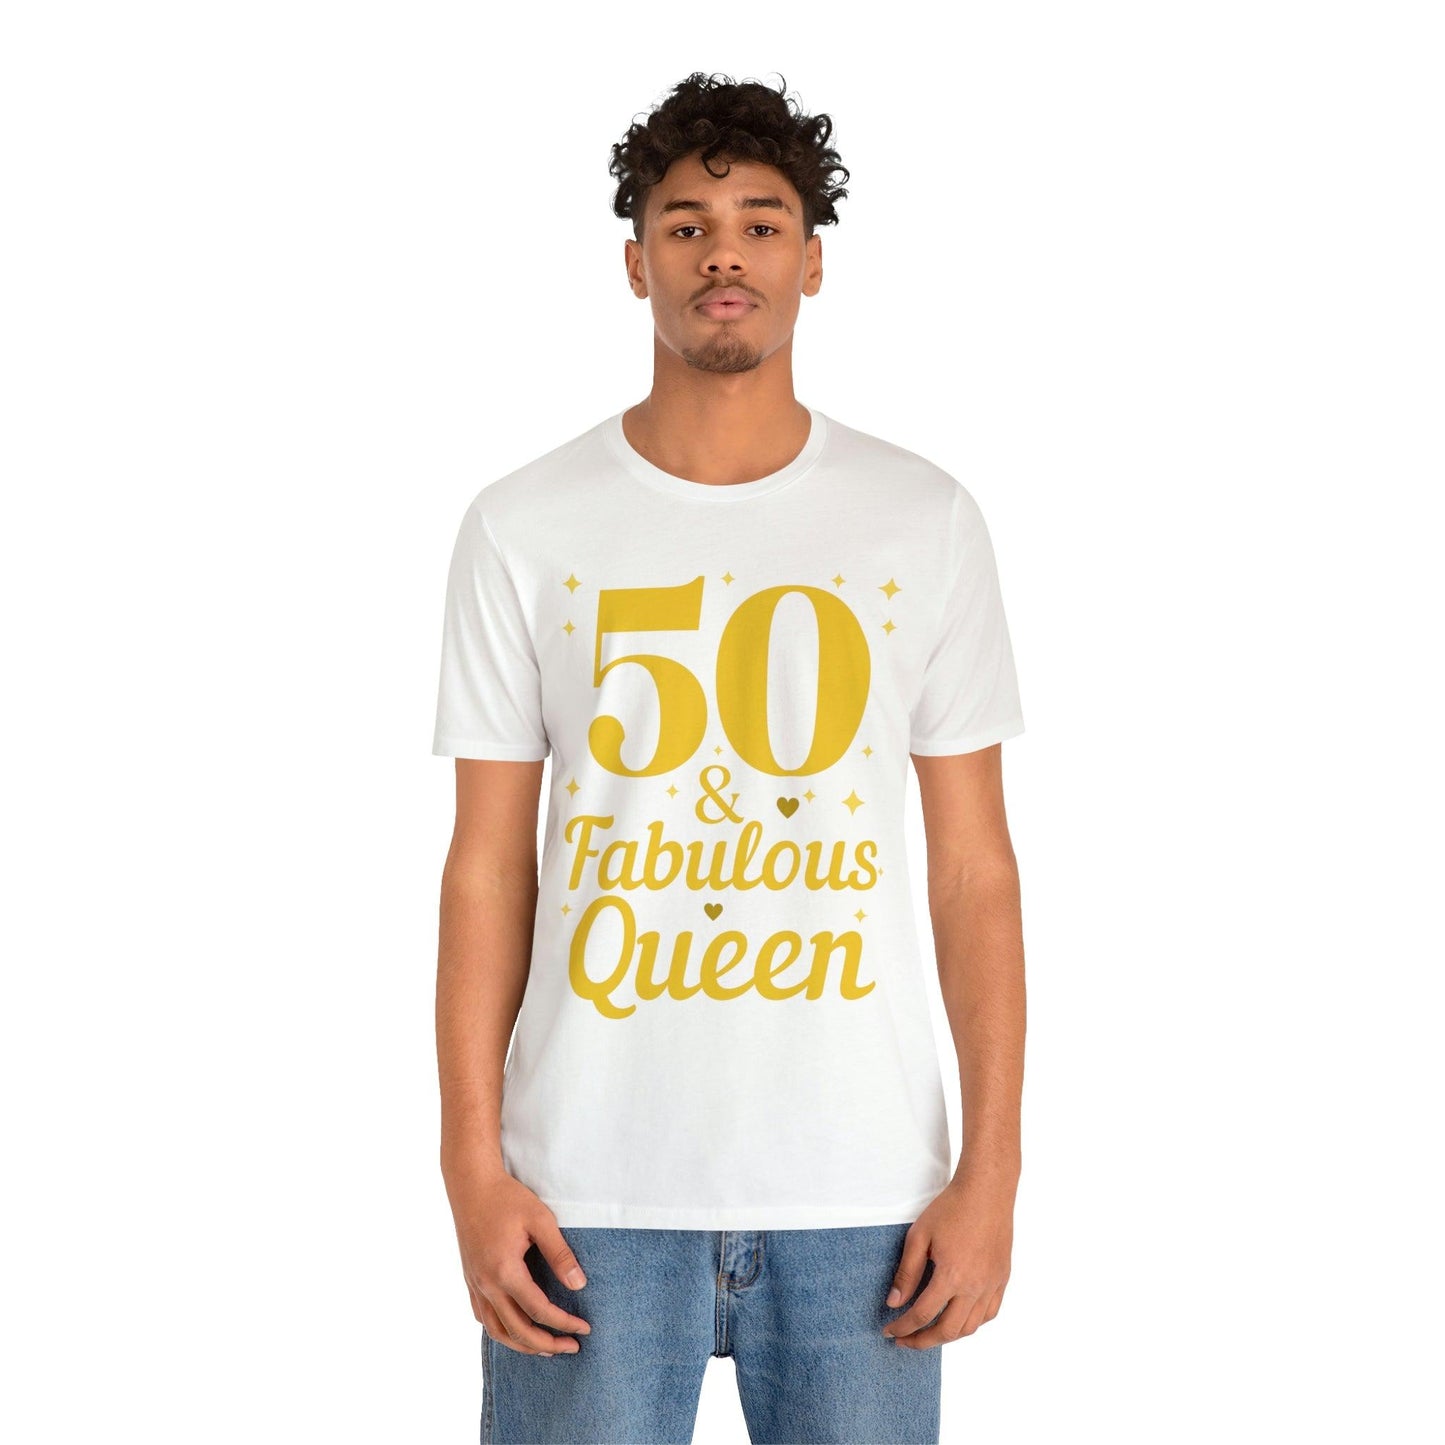 50 and Fabulous Queen shirt, Funny 50th birthday shirt, 50th birthday Tshirt, birthday queen shirt, Gift for 50th birthday, Vintage shirt, birthday gift, birthday girl shirt, mom’s birthday gift